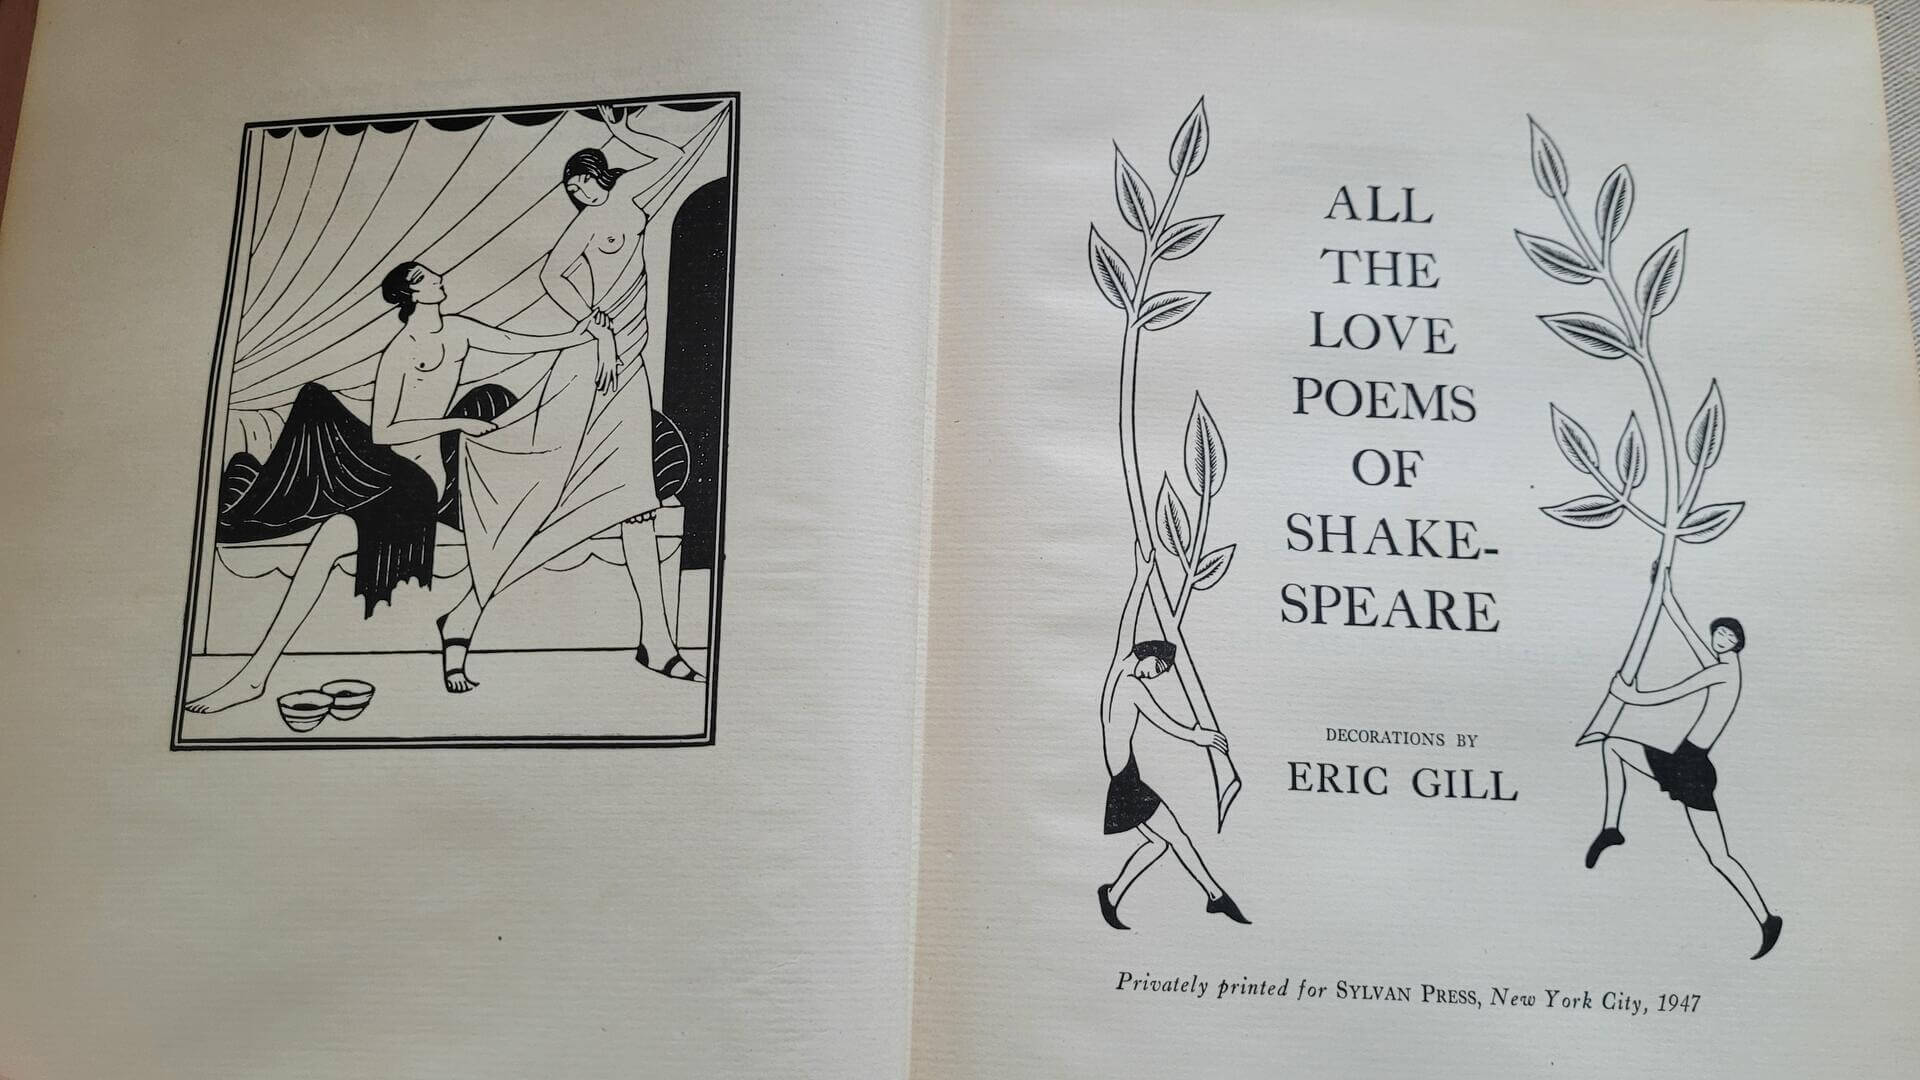 All the Love Poems of Shakespeare book with Eric Gill engravings. Rare collectible fine book limited edition hardcover 1947 First Edition NY Sylvan Press.